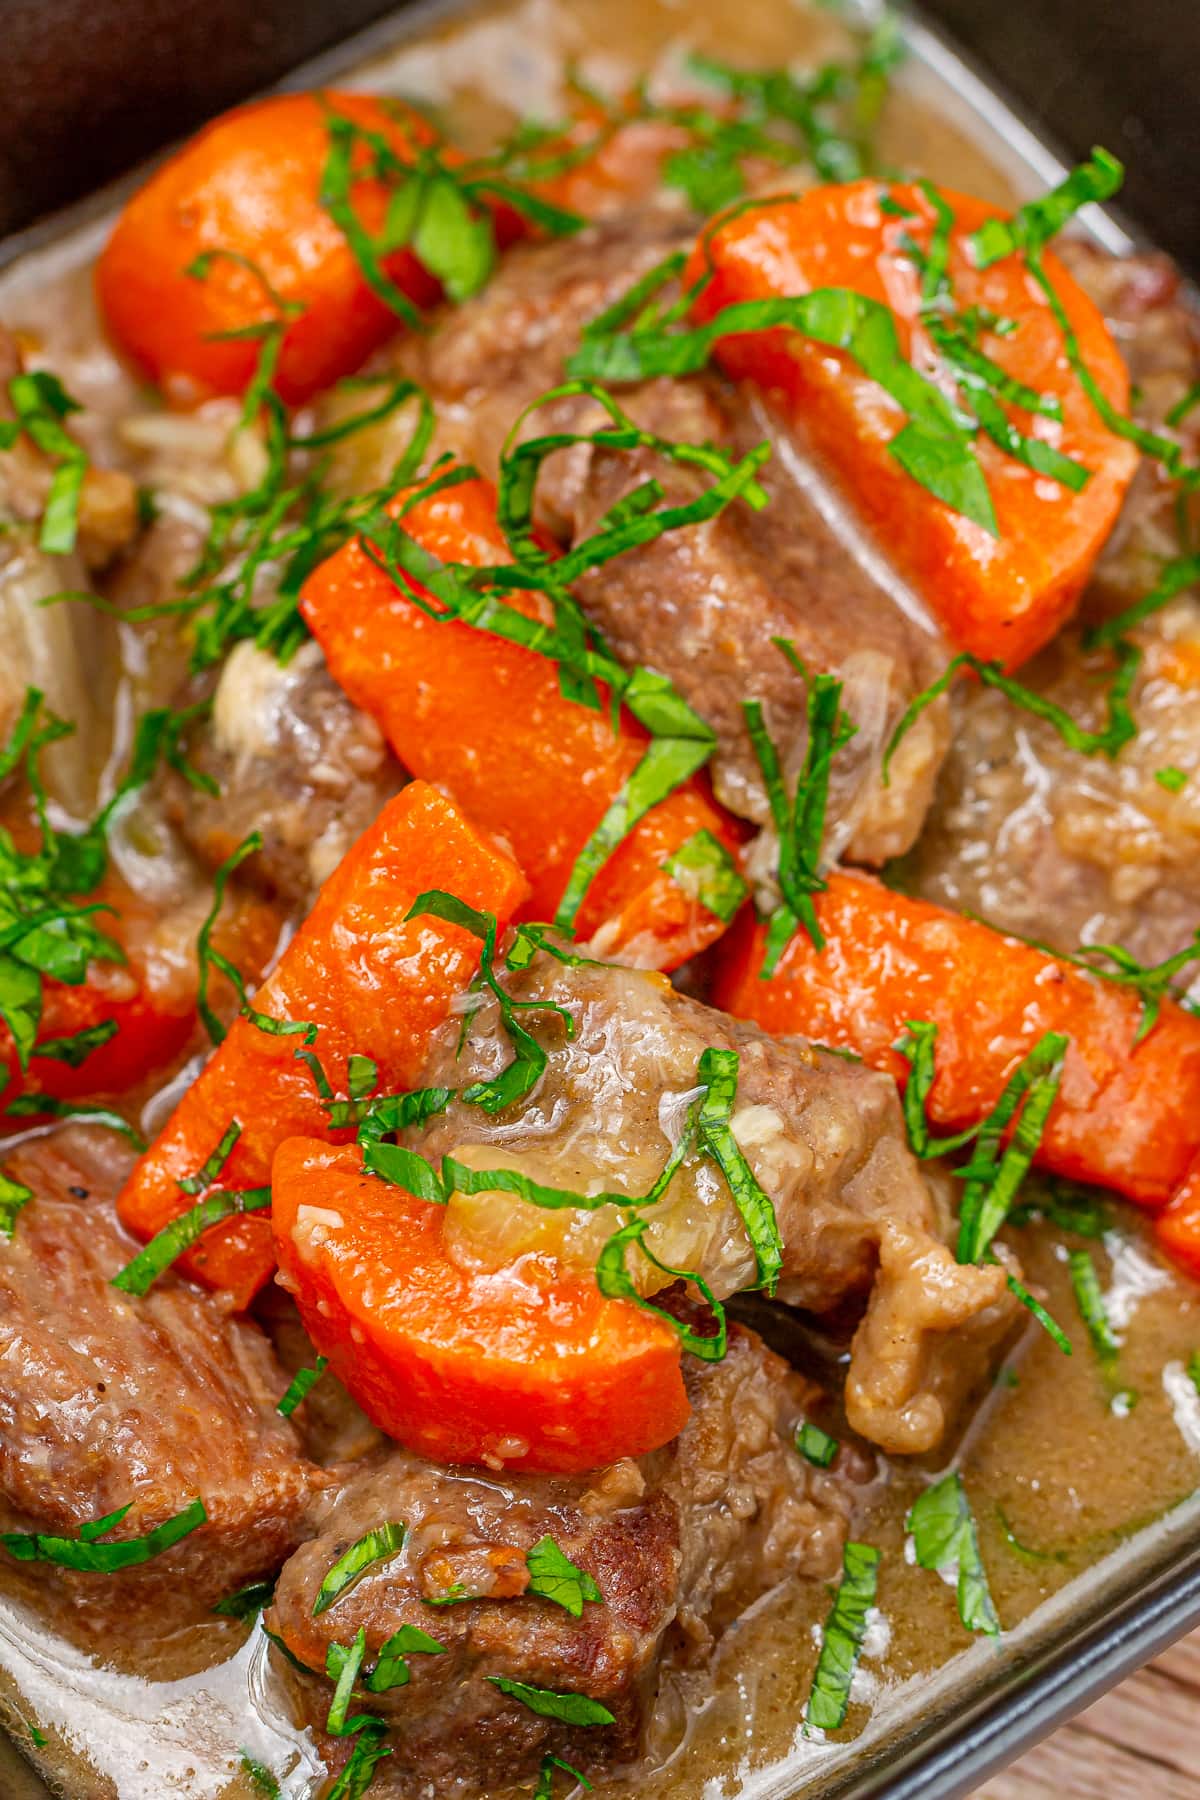 Beef stew with carrots and chopped parsley in a squared black plate on a wooden surface.